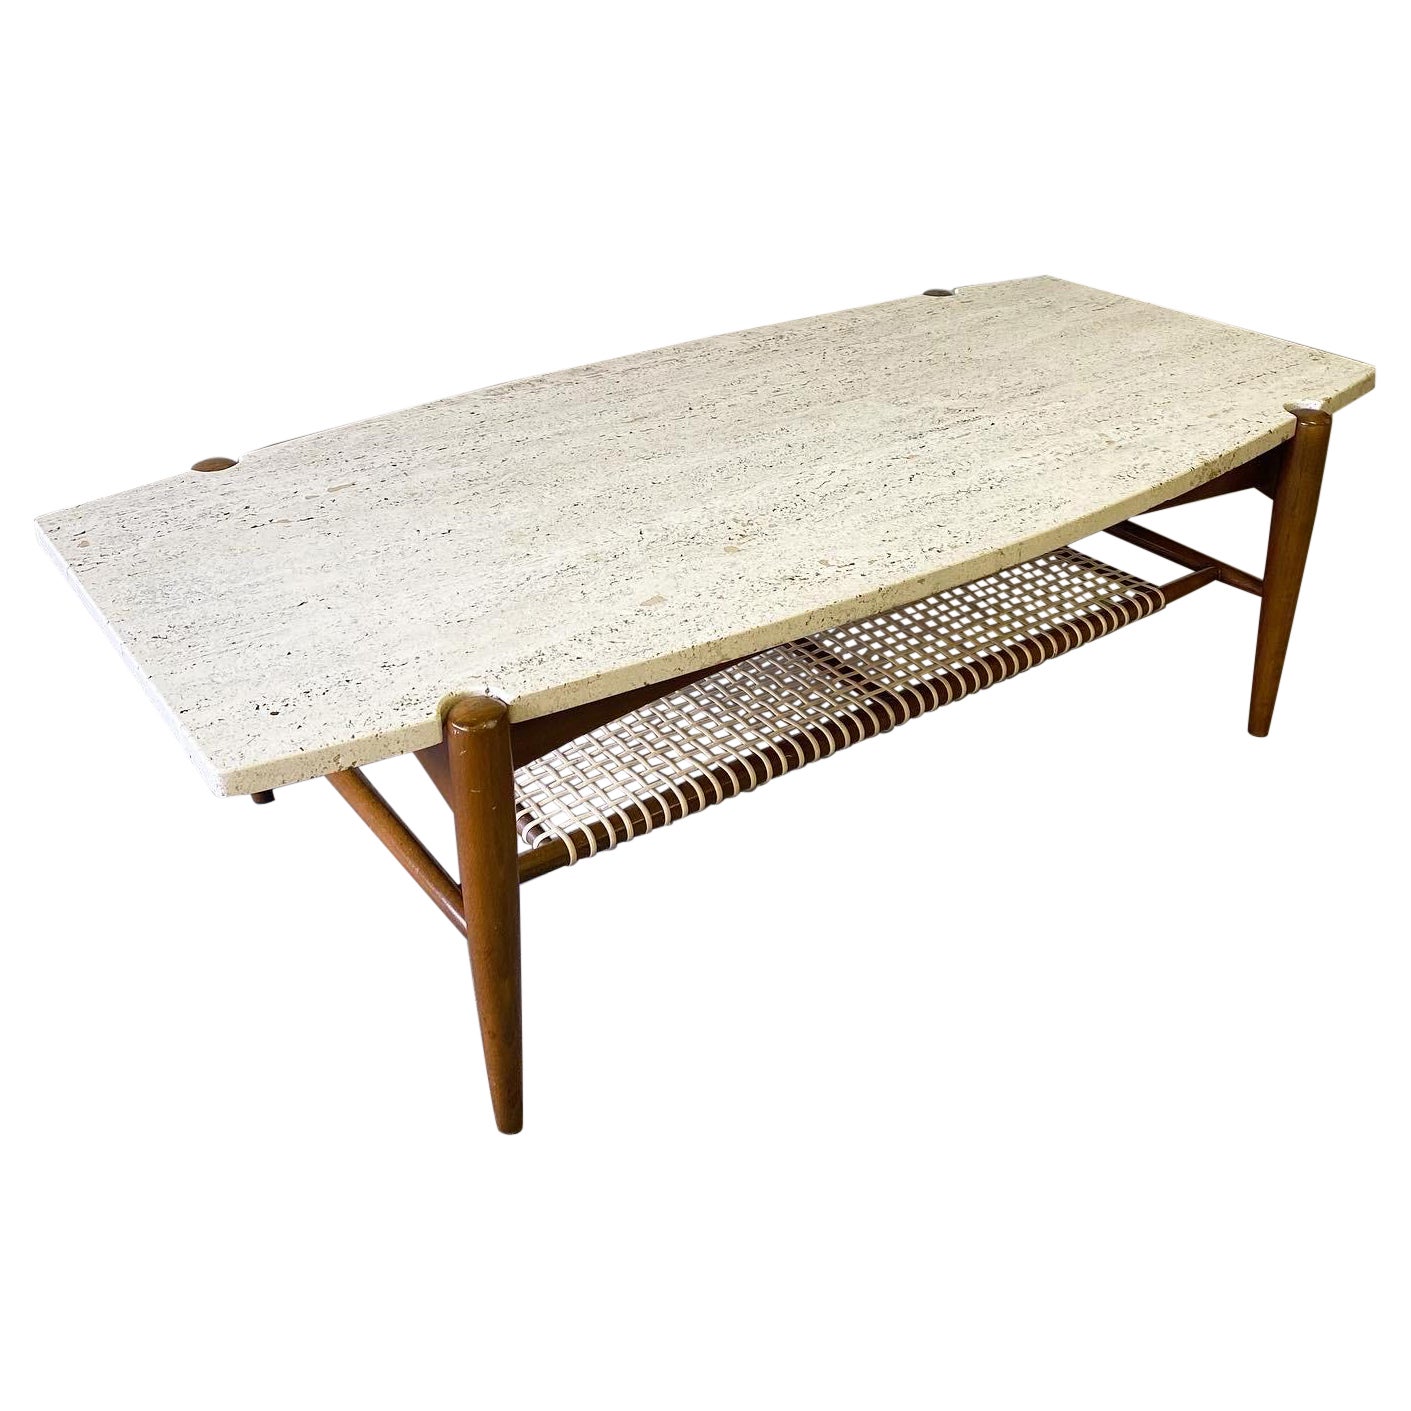 Folke Ohlsson for Dux Travertine and Cane Coffee Table, ca. 1960’s